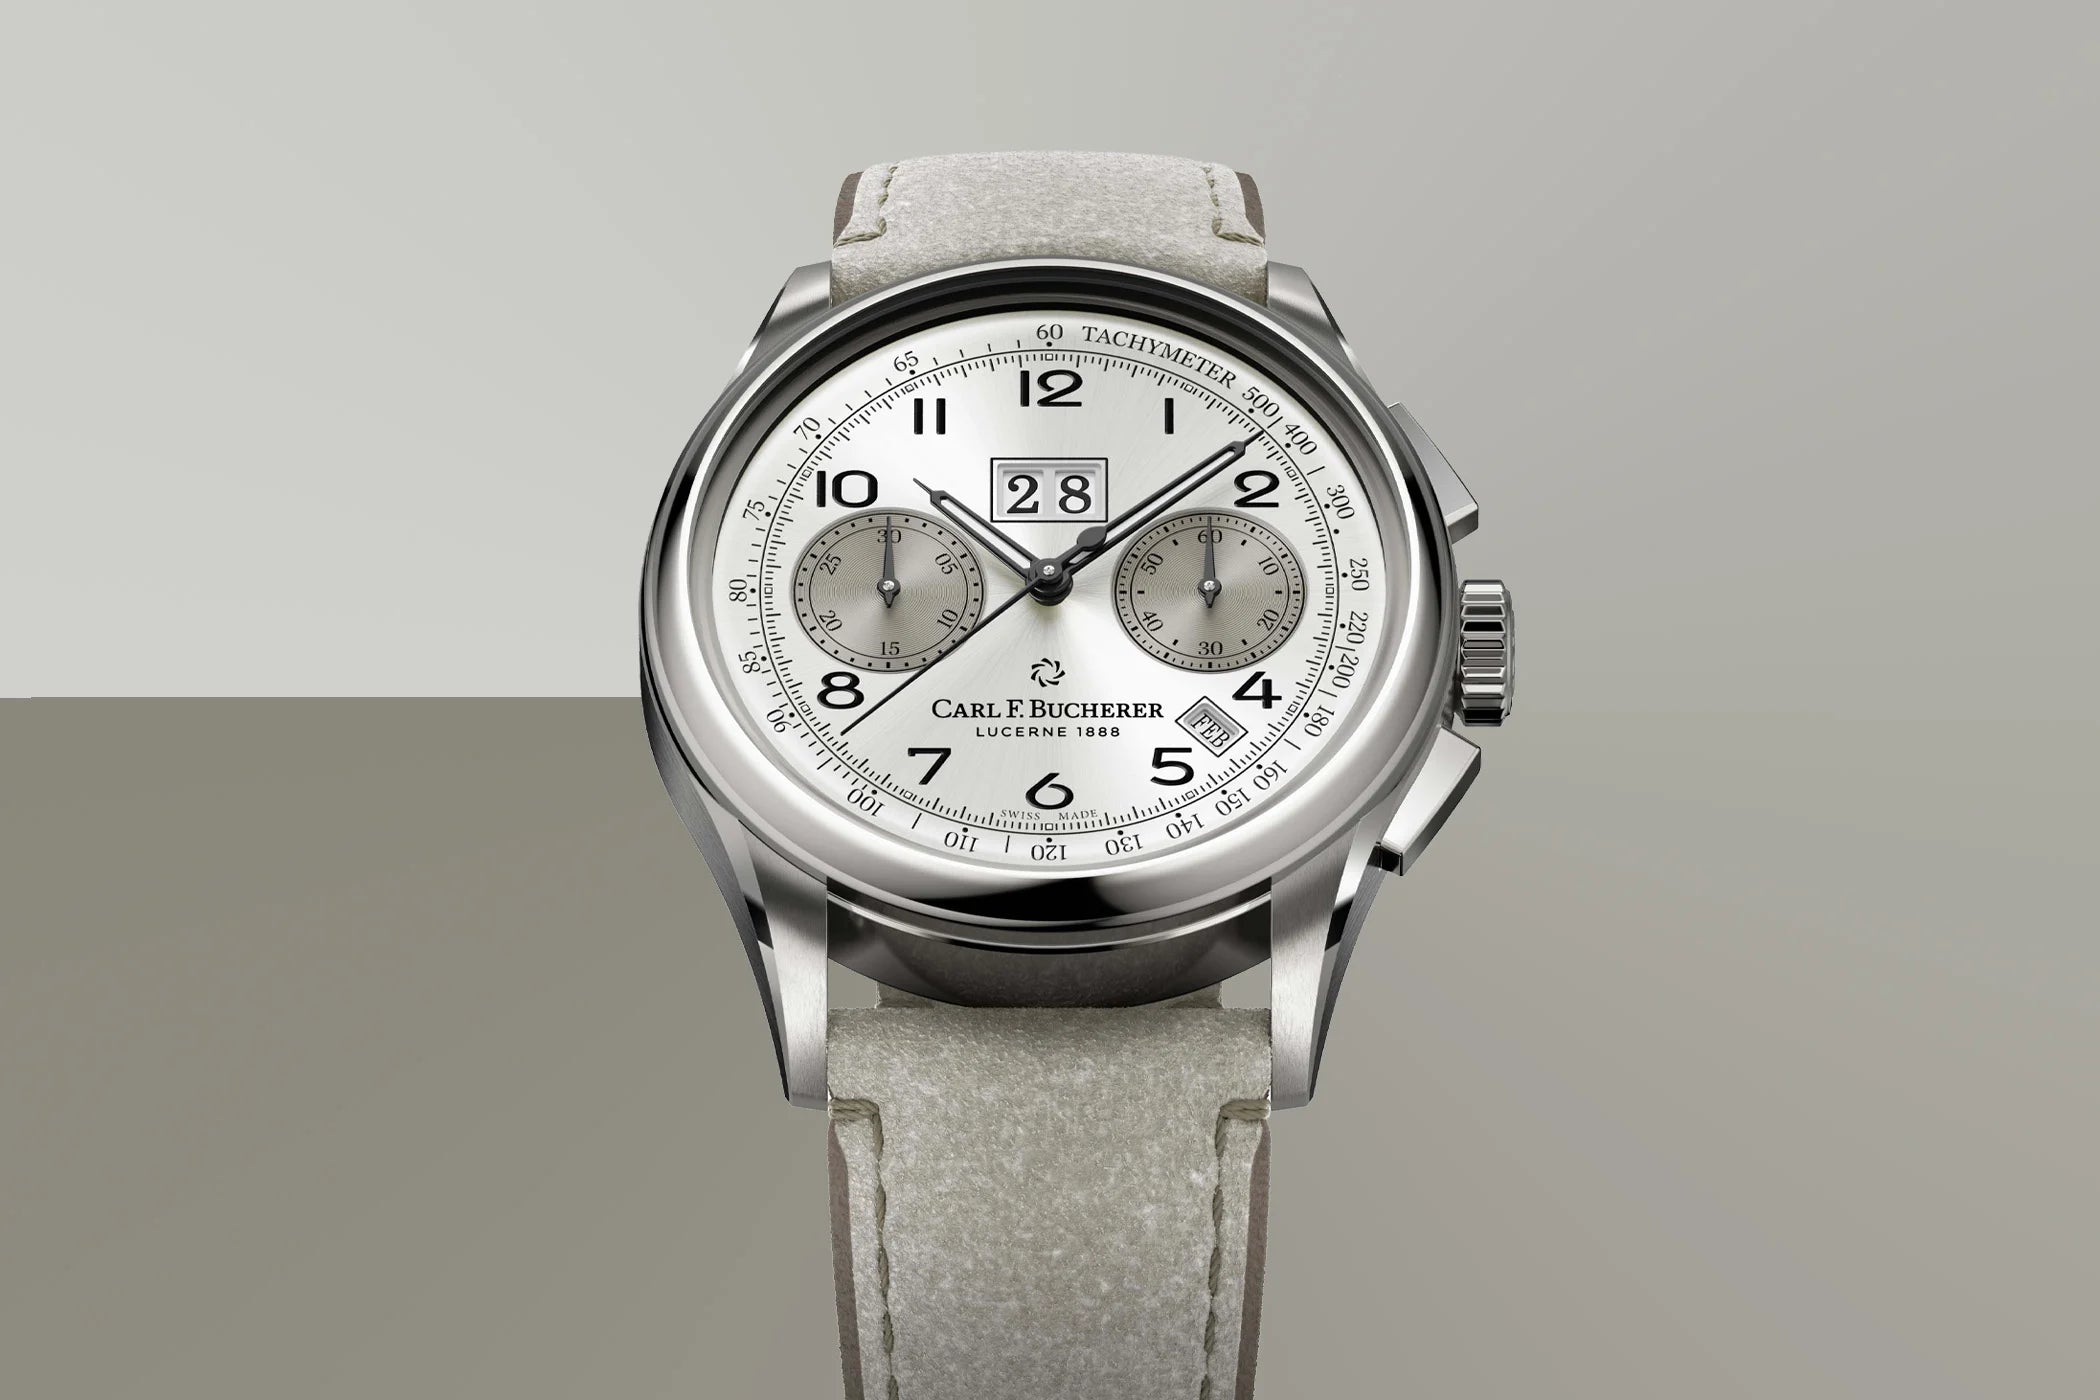 Carl F. Bucherer launches a Grey Edition of the Heritage BiCompax Annual